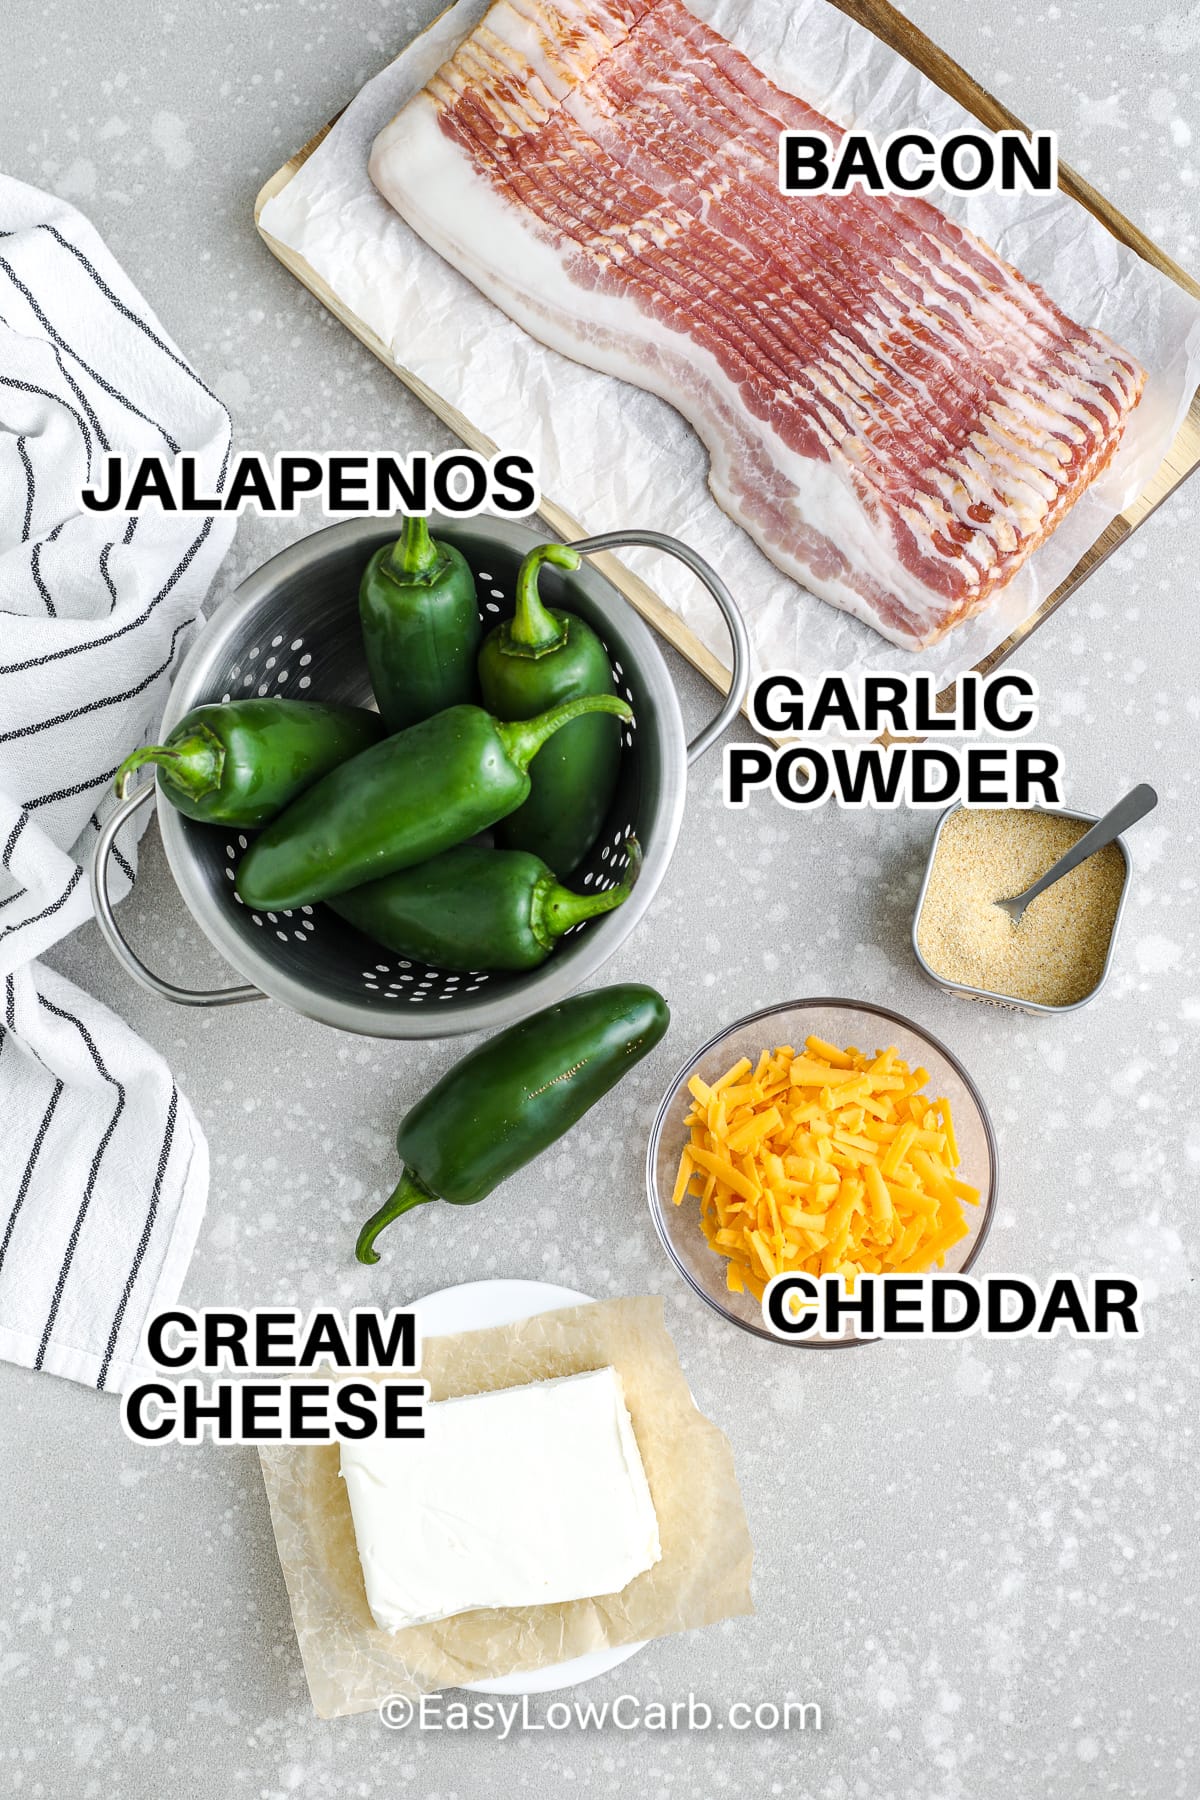 ingredients to make bacon wrapped jalapenos including bacon, jalapenos, garlic powder, cheddar, and cream cheese